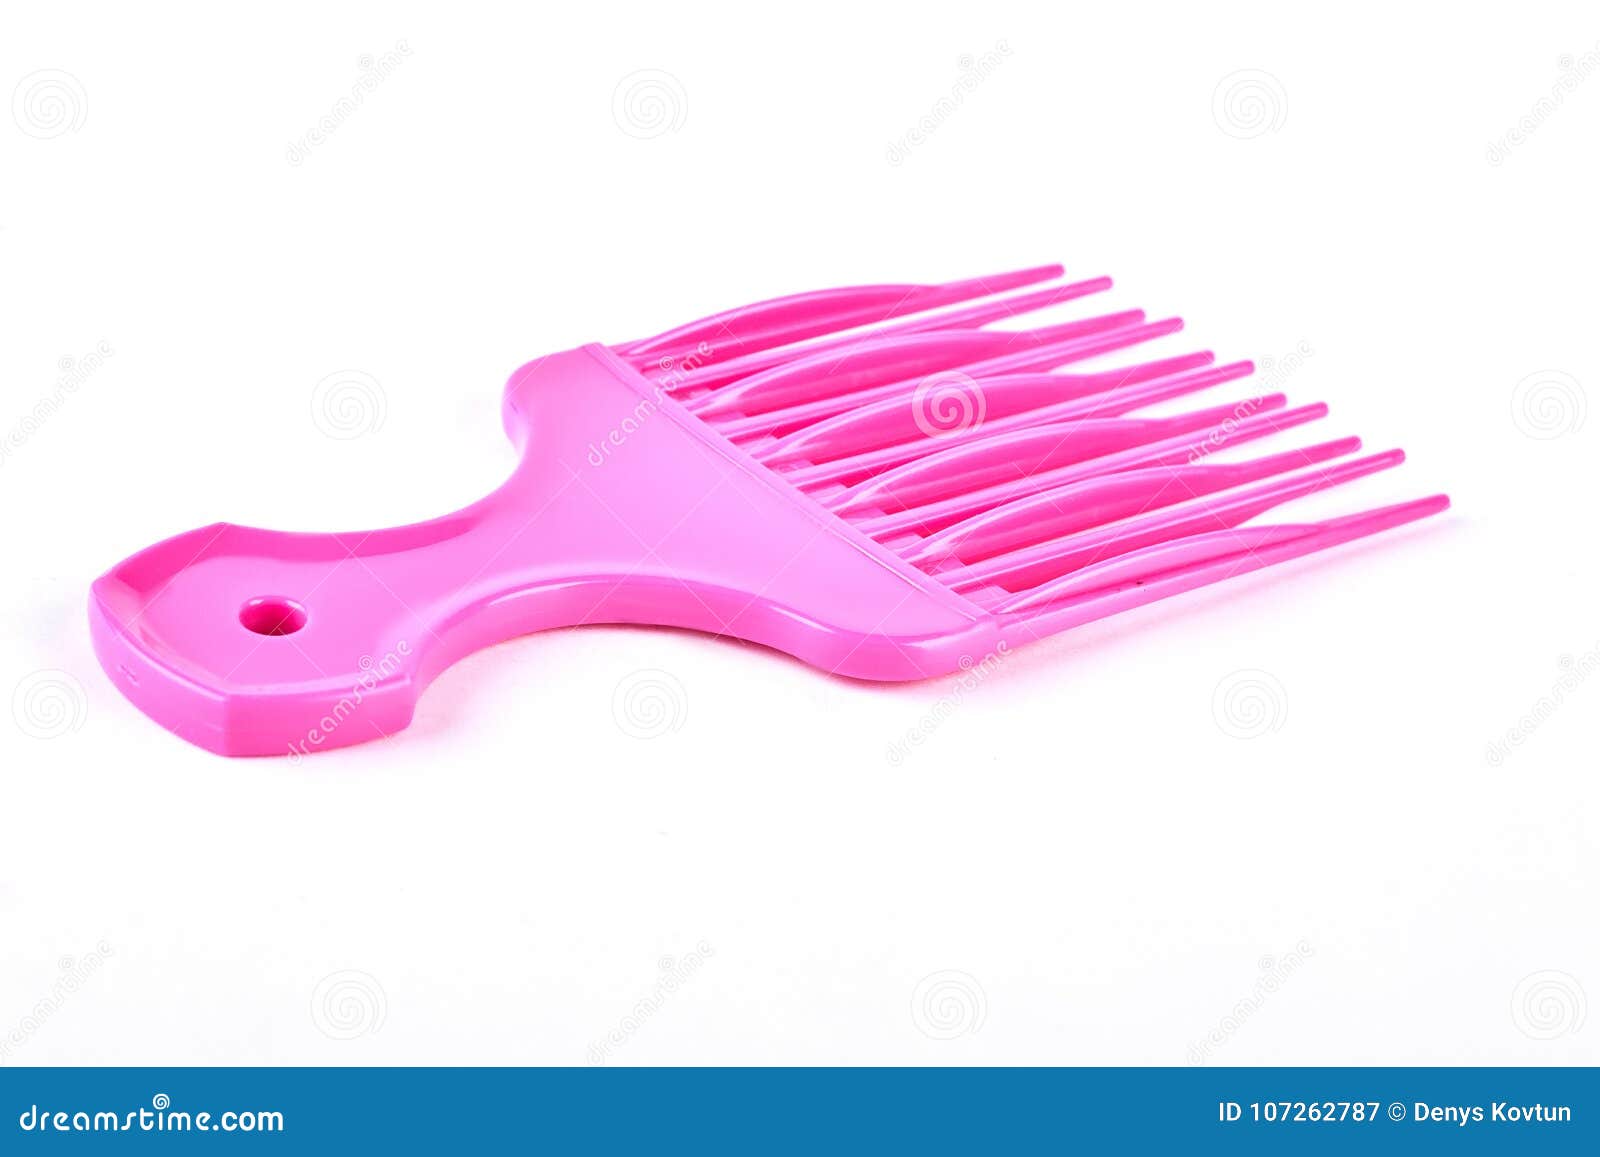 Pink plastic afro comb. stock image. Image of afrocomb - 107262787